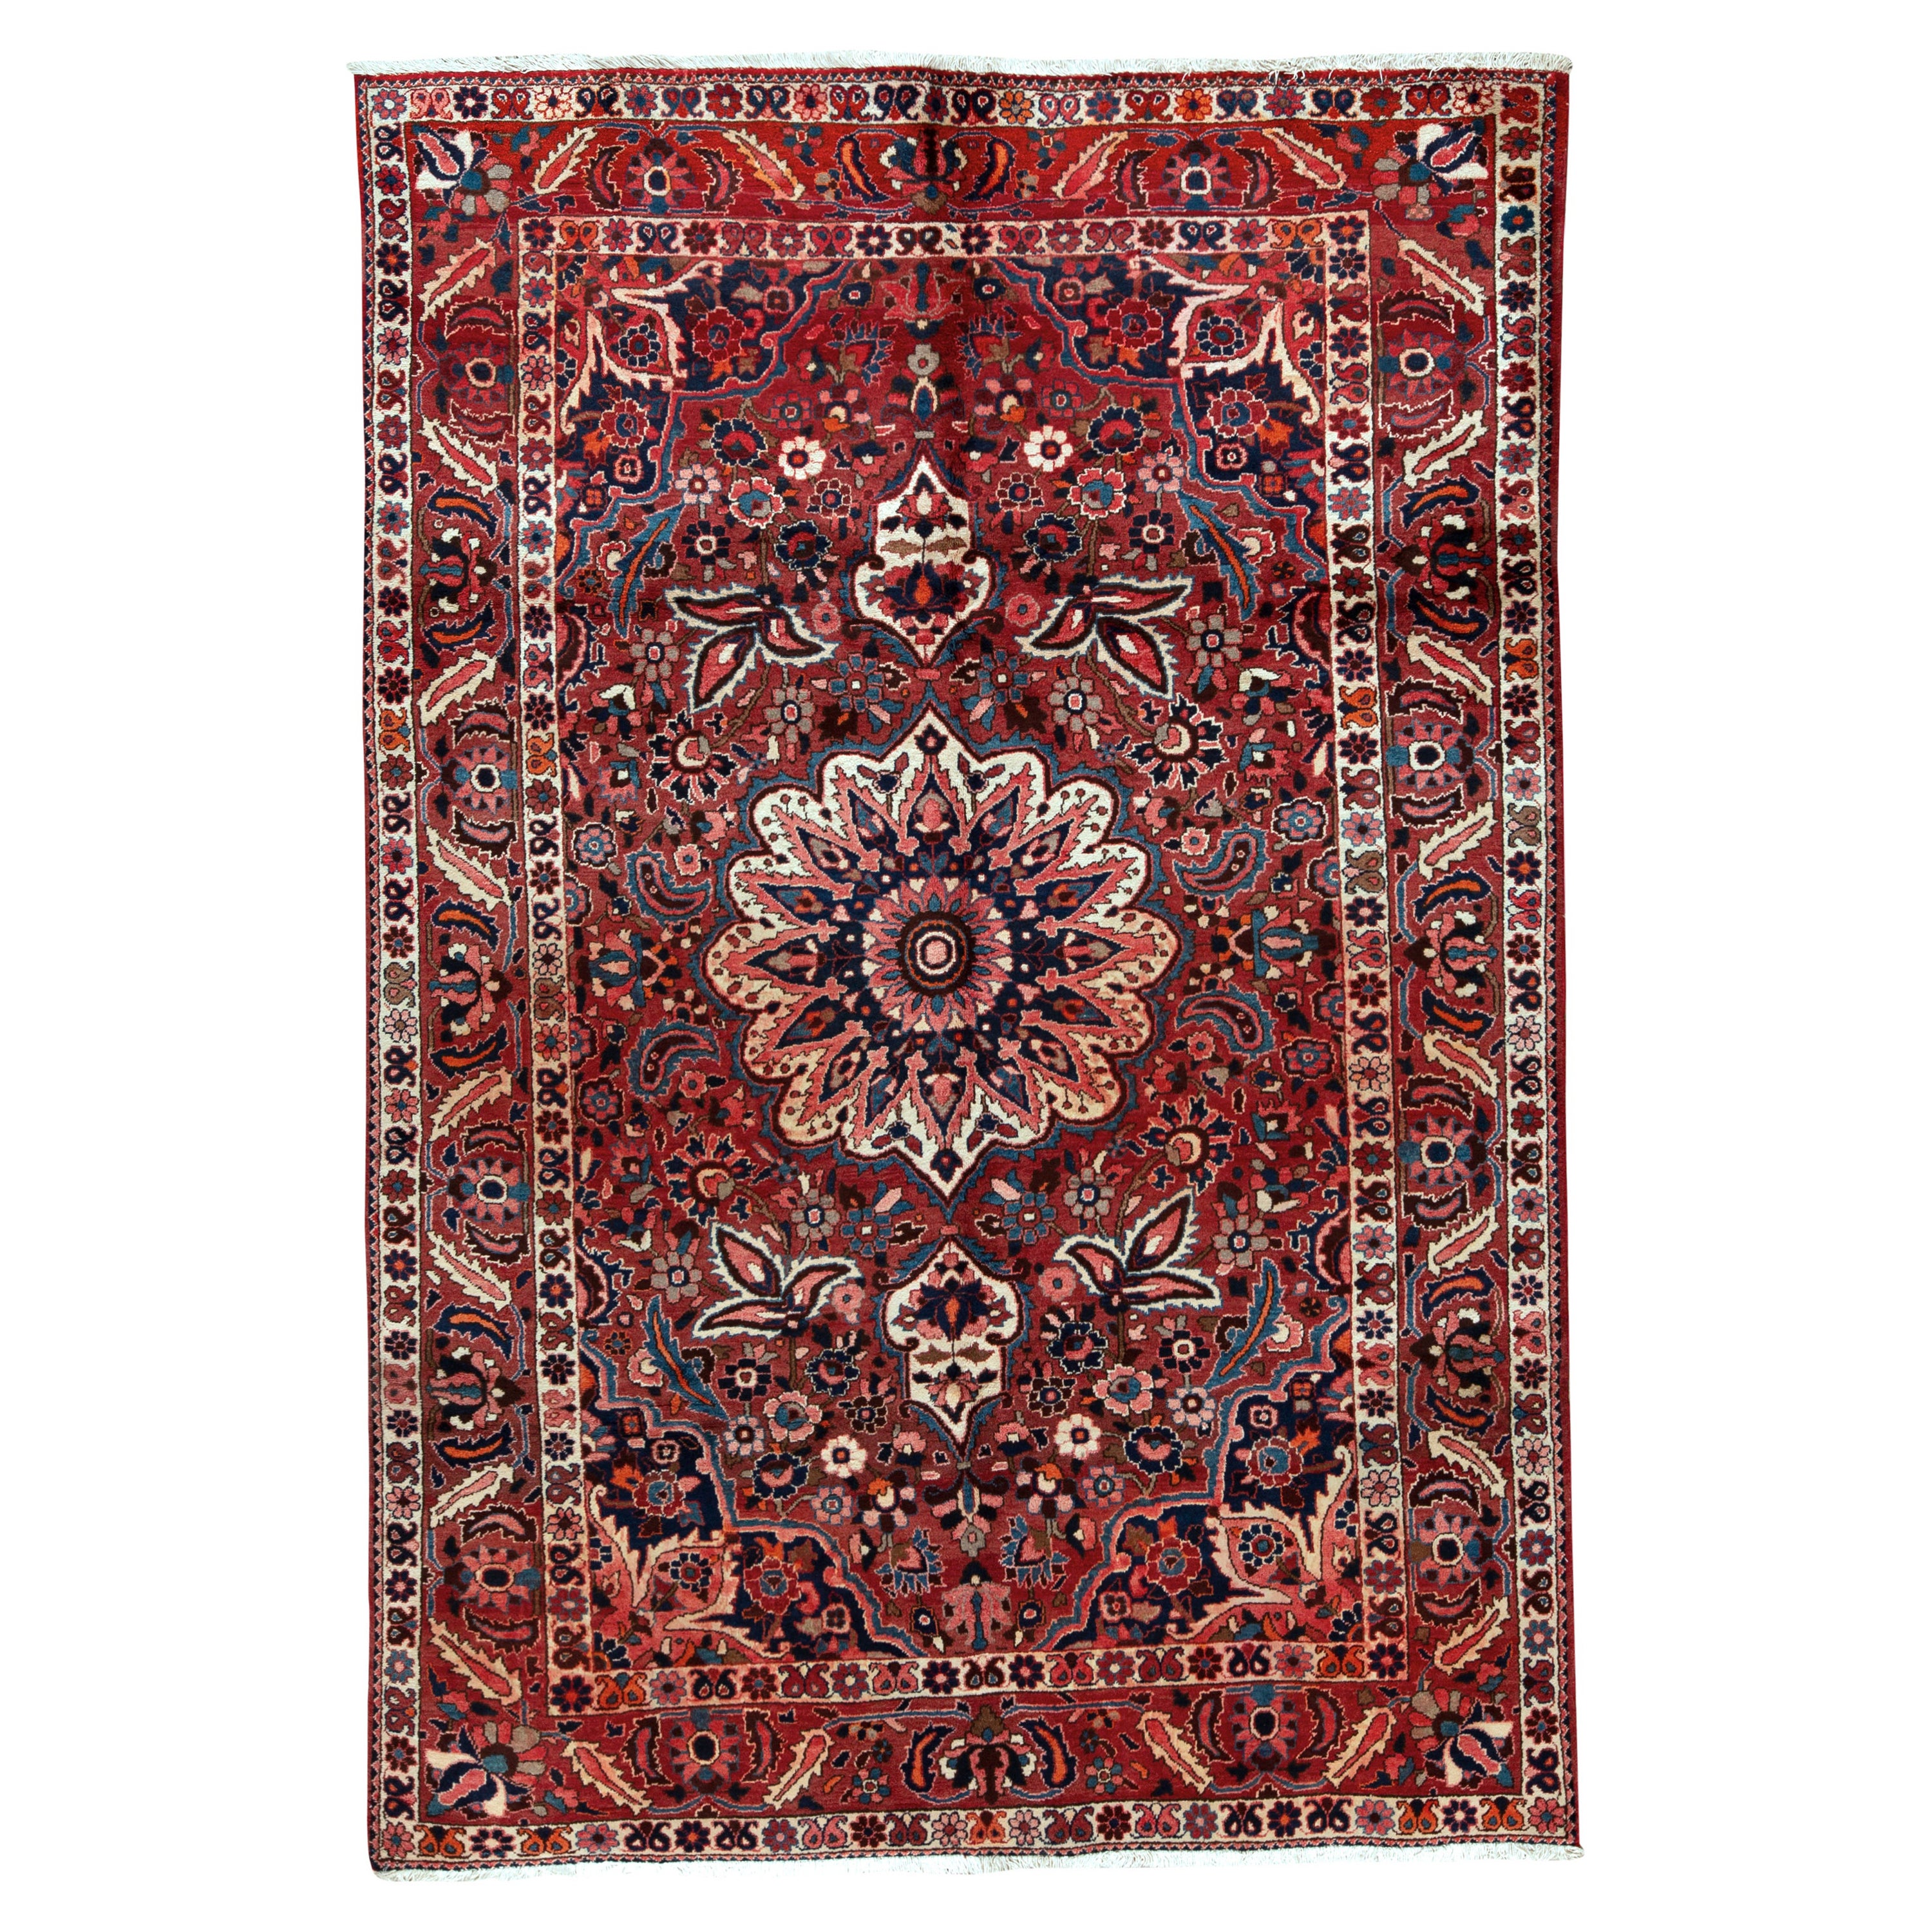   Antique Persian Fine Traditional Handwoven Luxury Wool Navy / Red Rug For Sale